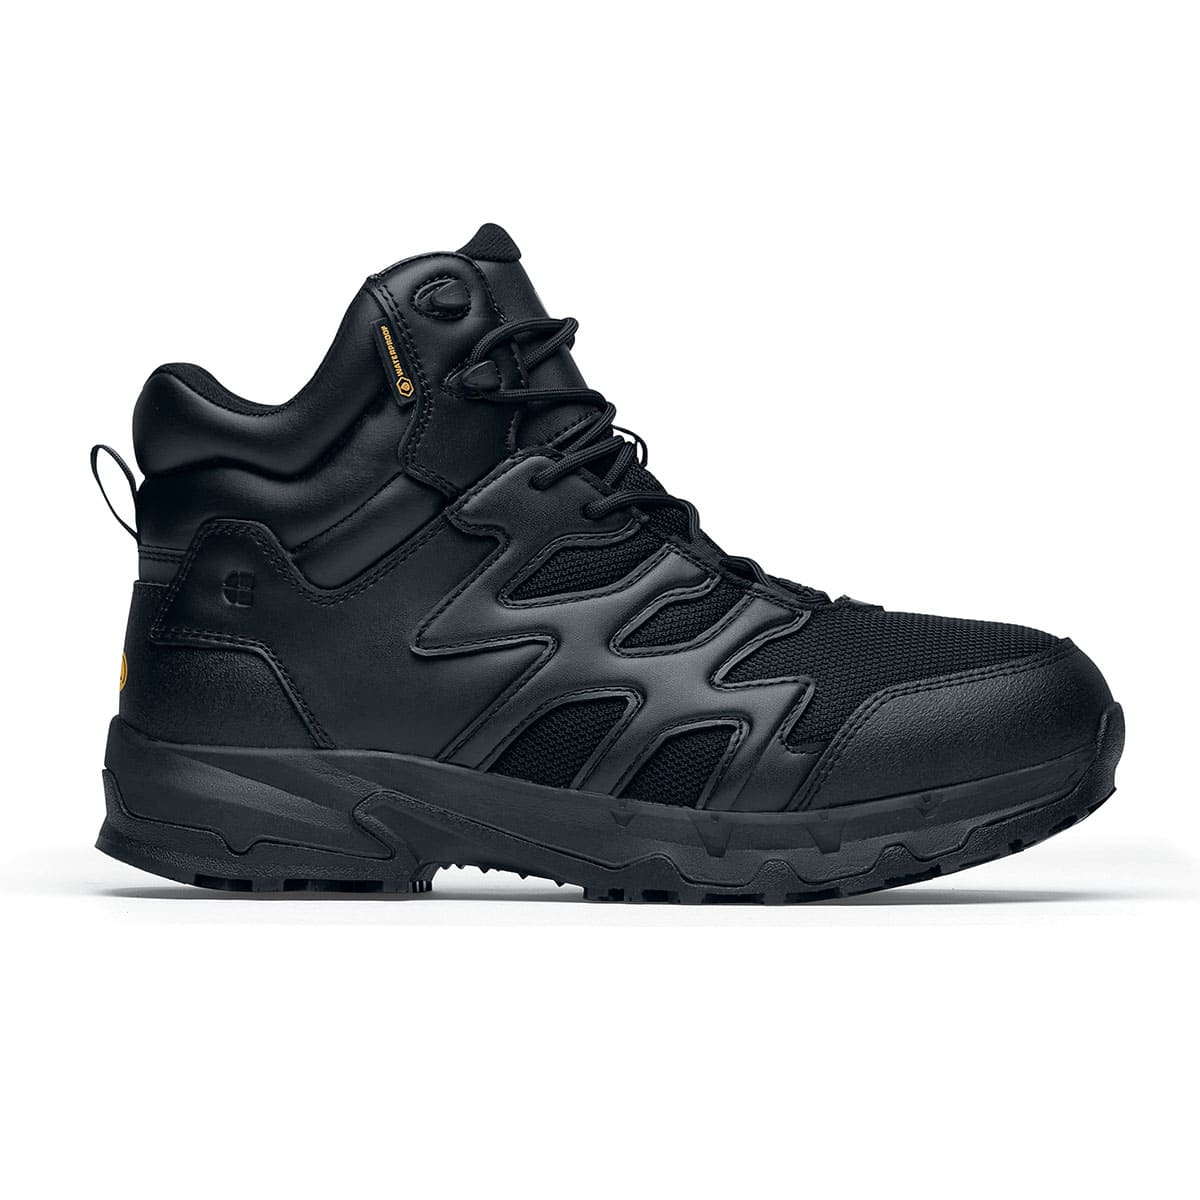 The Shoes for Crews Carrig Mid is a slip-resistant safety boot with a waterproof upper, seen from the right.